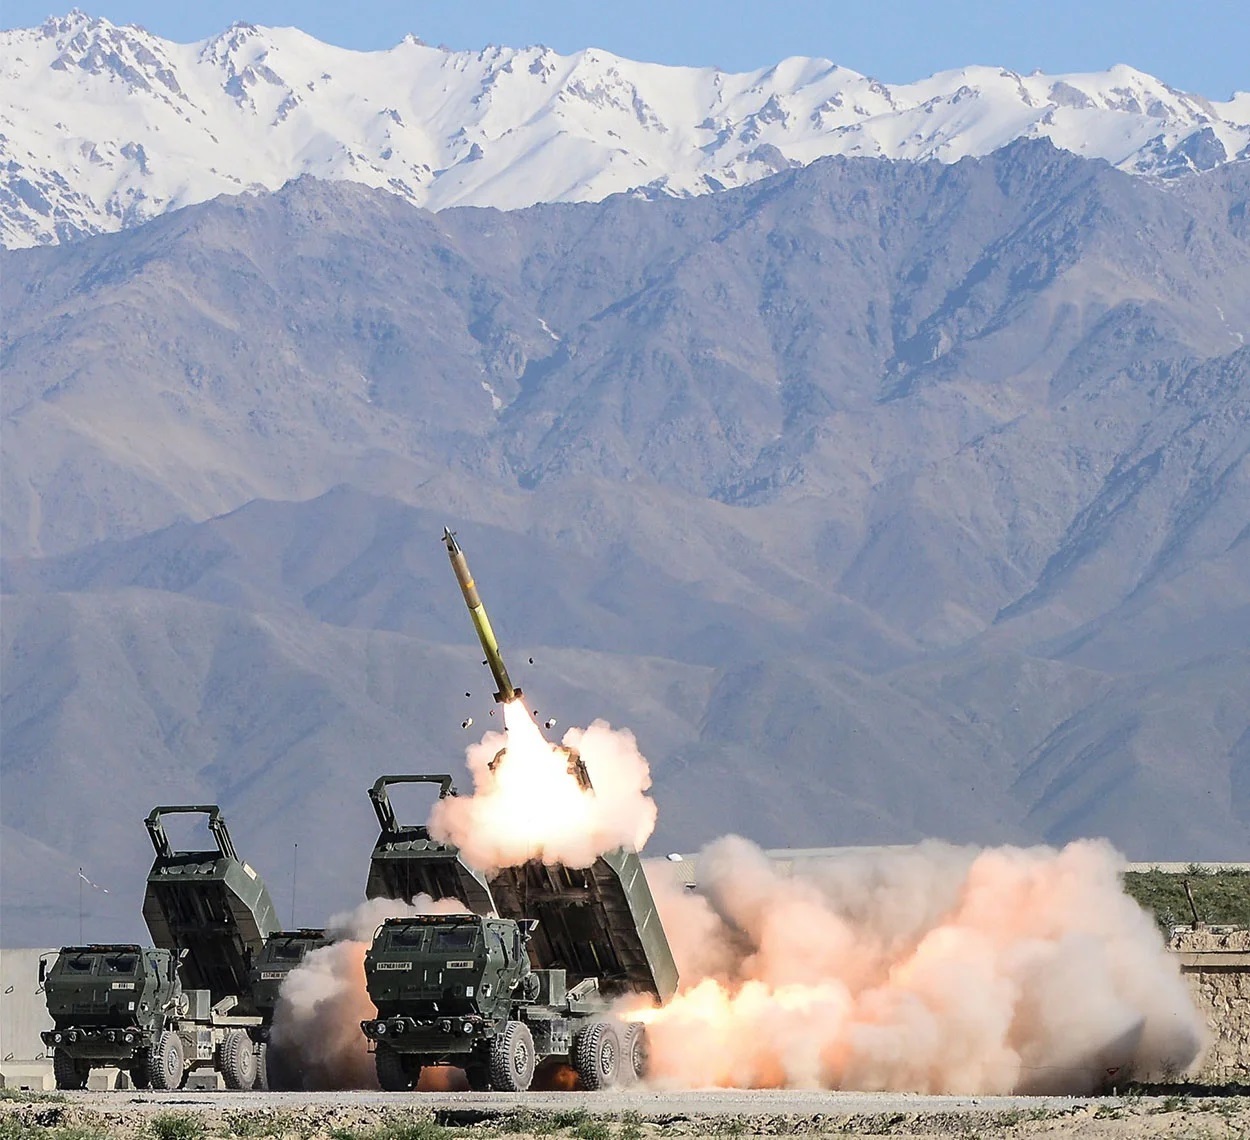 Aerojet Rocketdyne, a segment of L3Harris Technologies, produces the solid propellant rocket motor for the Guided Multiple Launch Rocket System (GMLRS). GMLRS fires surface-to-surface rockets and has been highly effective in recent combat operations. Receiving the "70km sniper rifle" nickname.